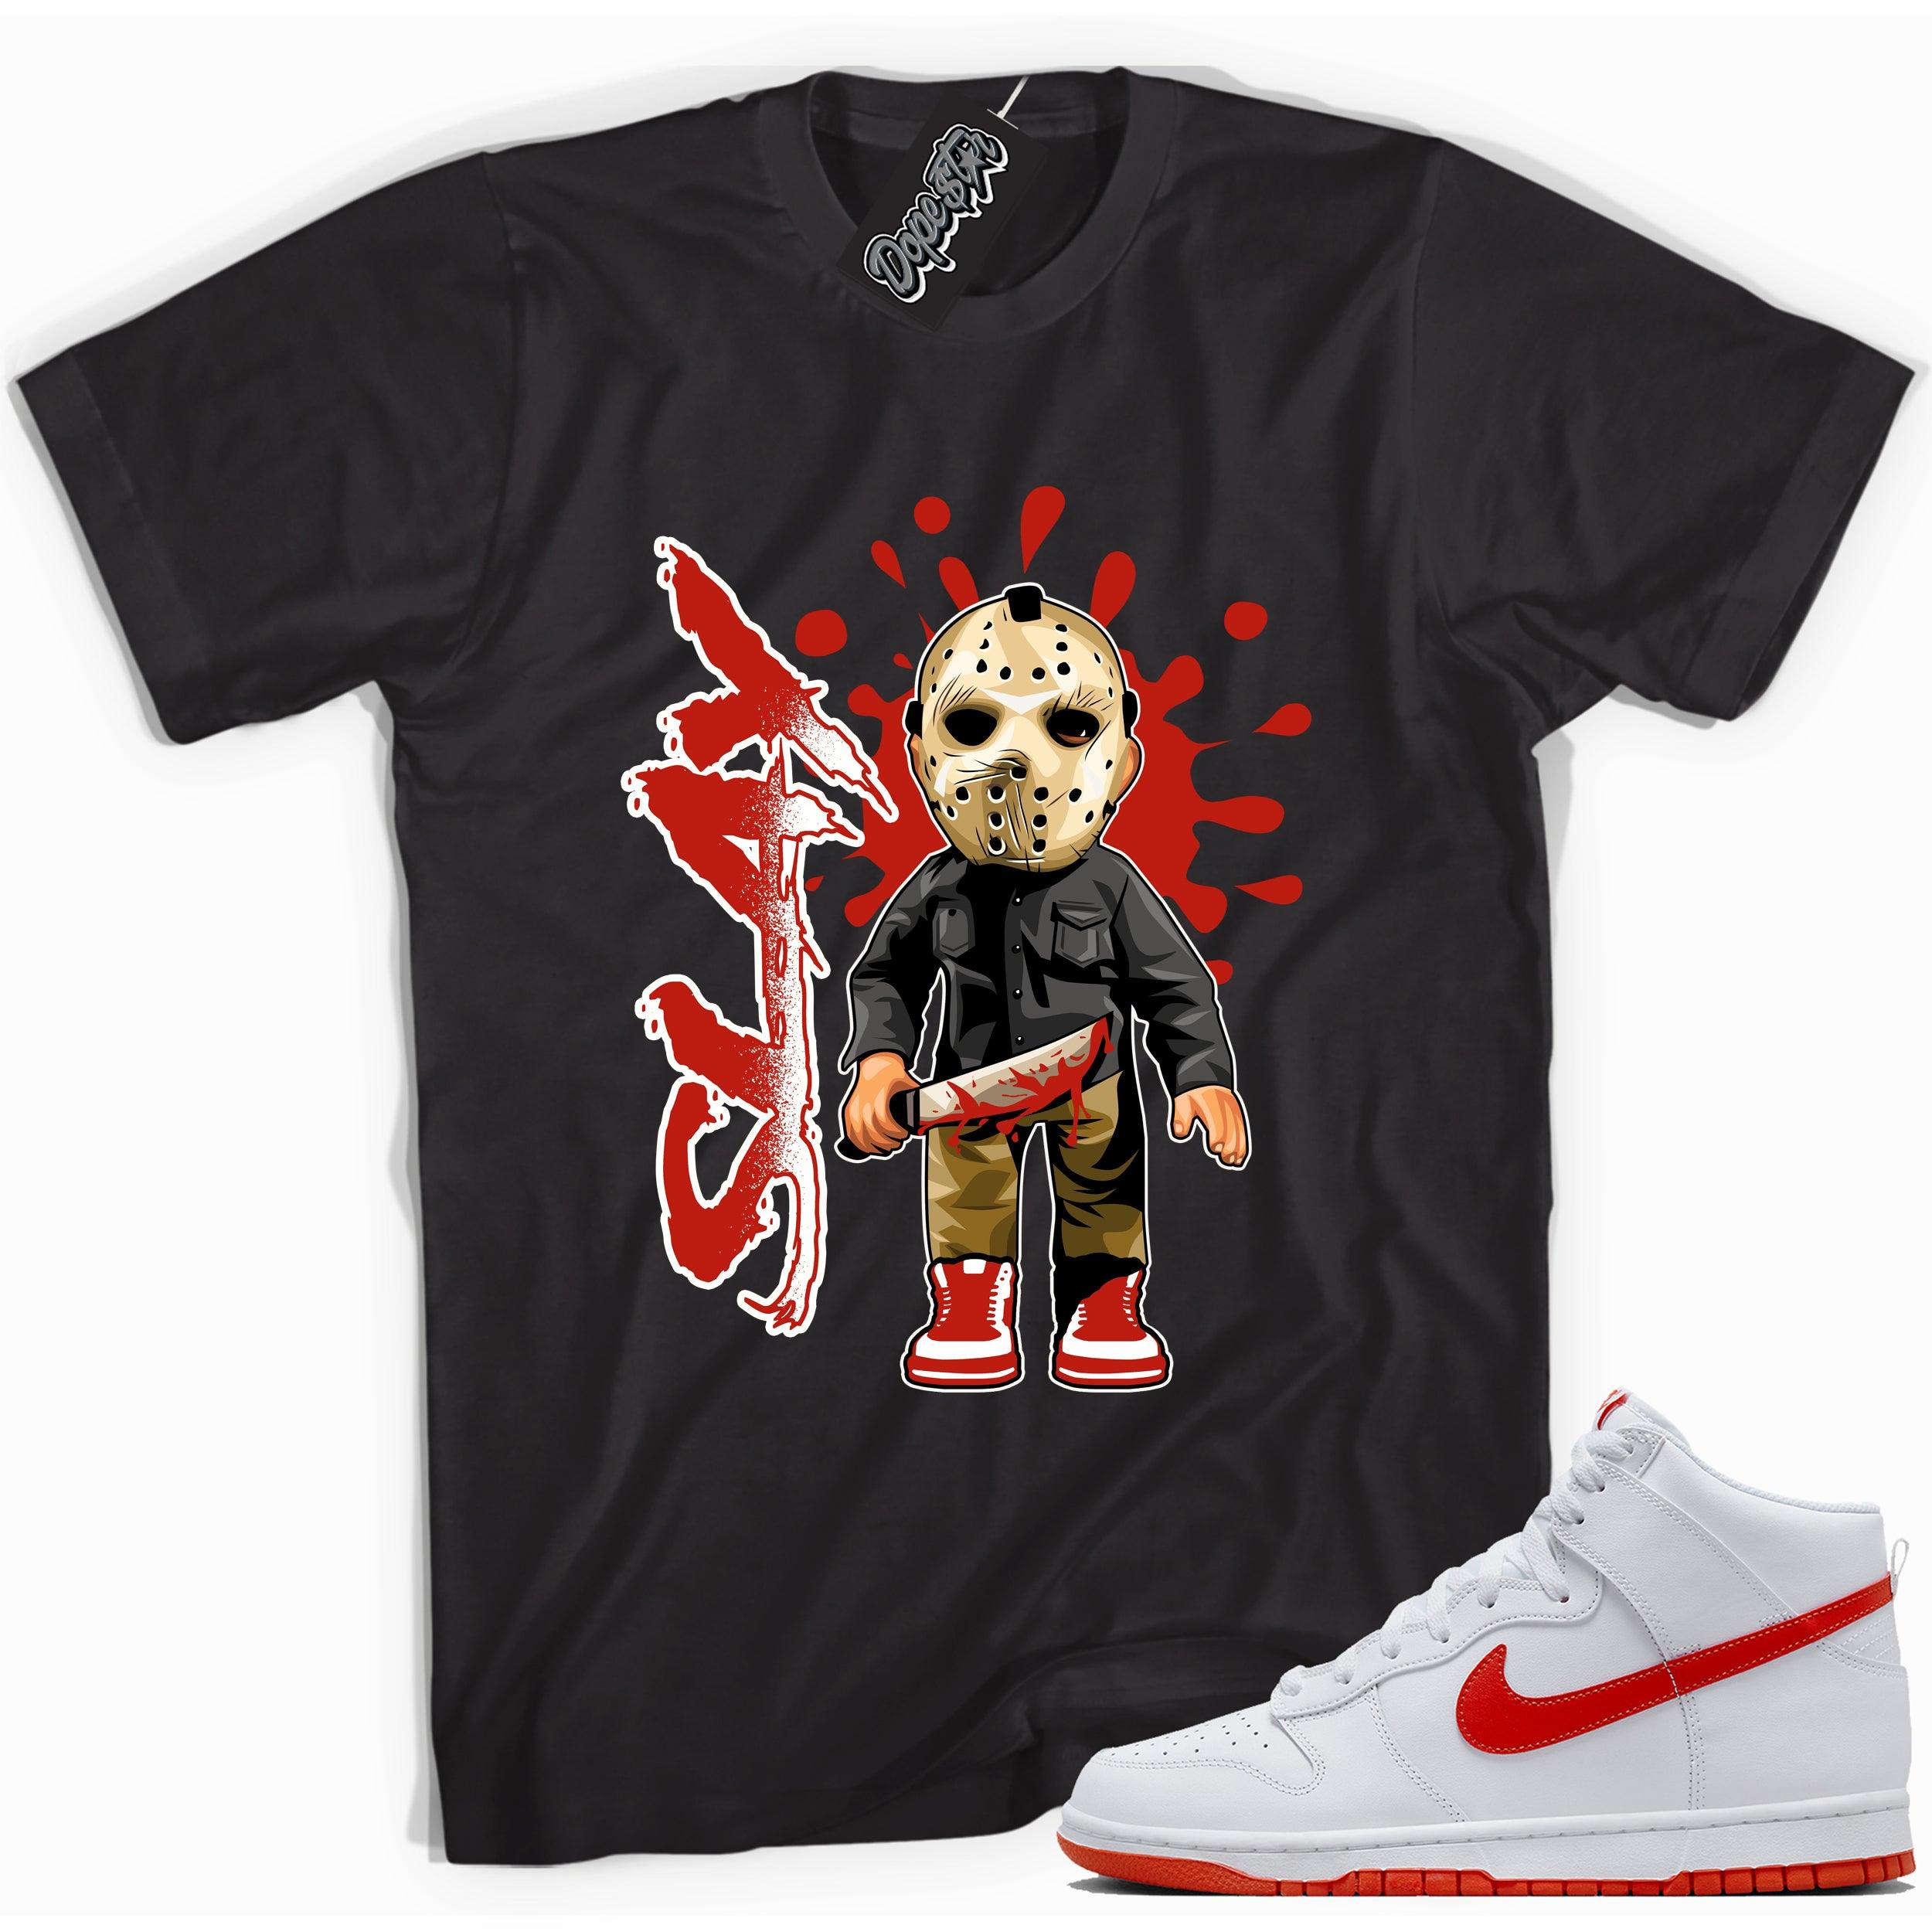 Cool black graphic tee with 'slay' print, that perfectly matches Nike Dunk High White Picante Red sneakers.